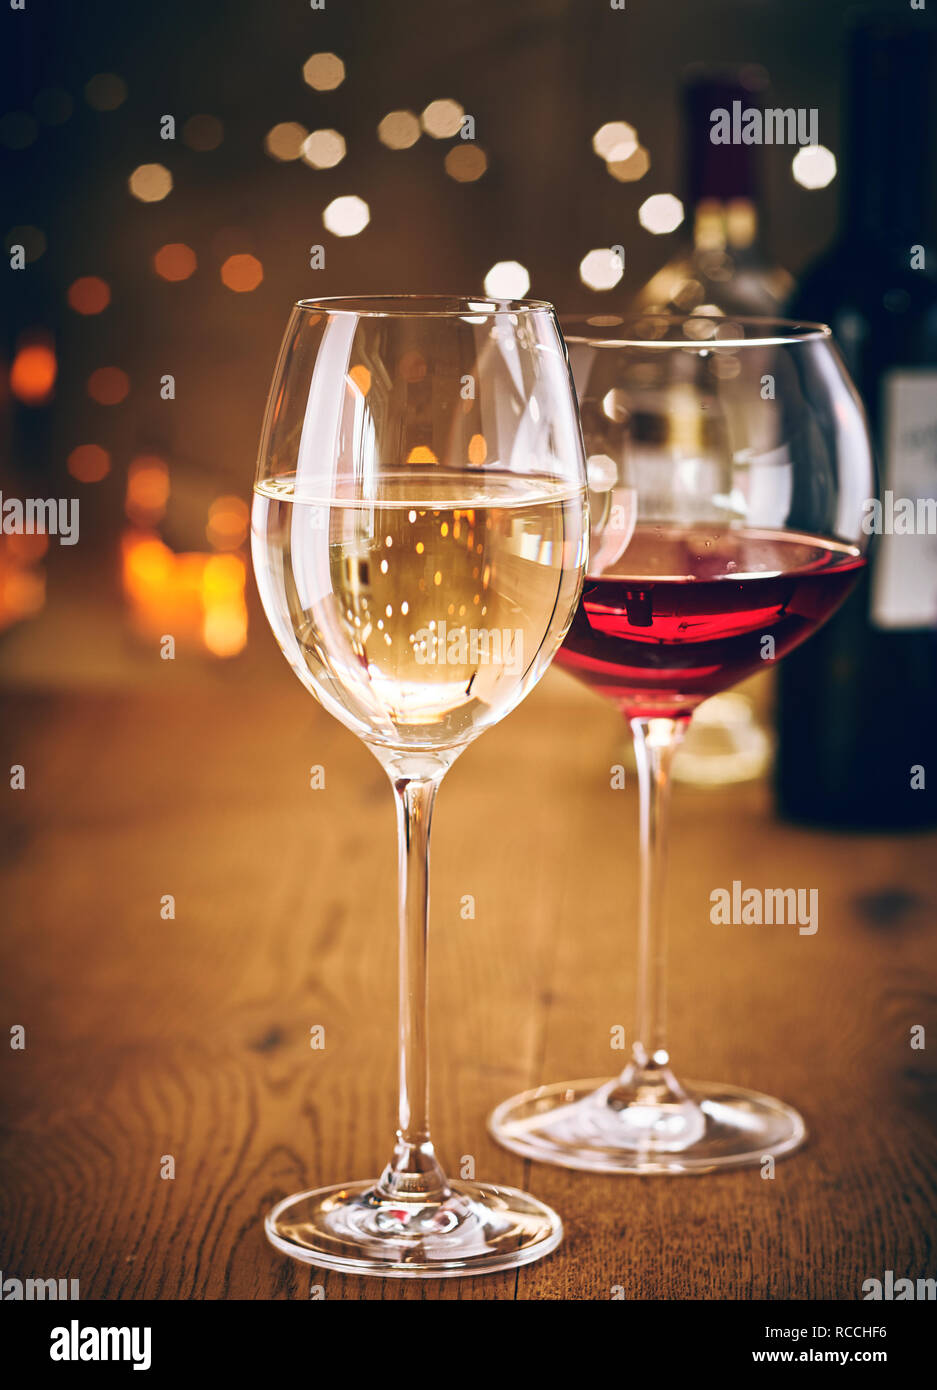 Glasses of red and white wine on a wooden table with sparkling party lights bokeh background Stock Photo